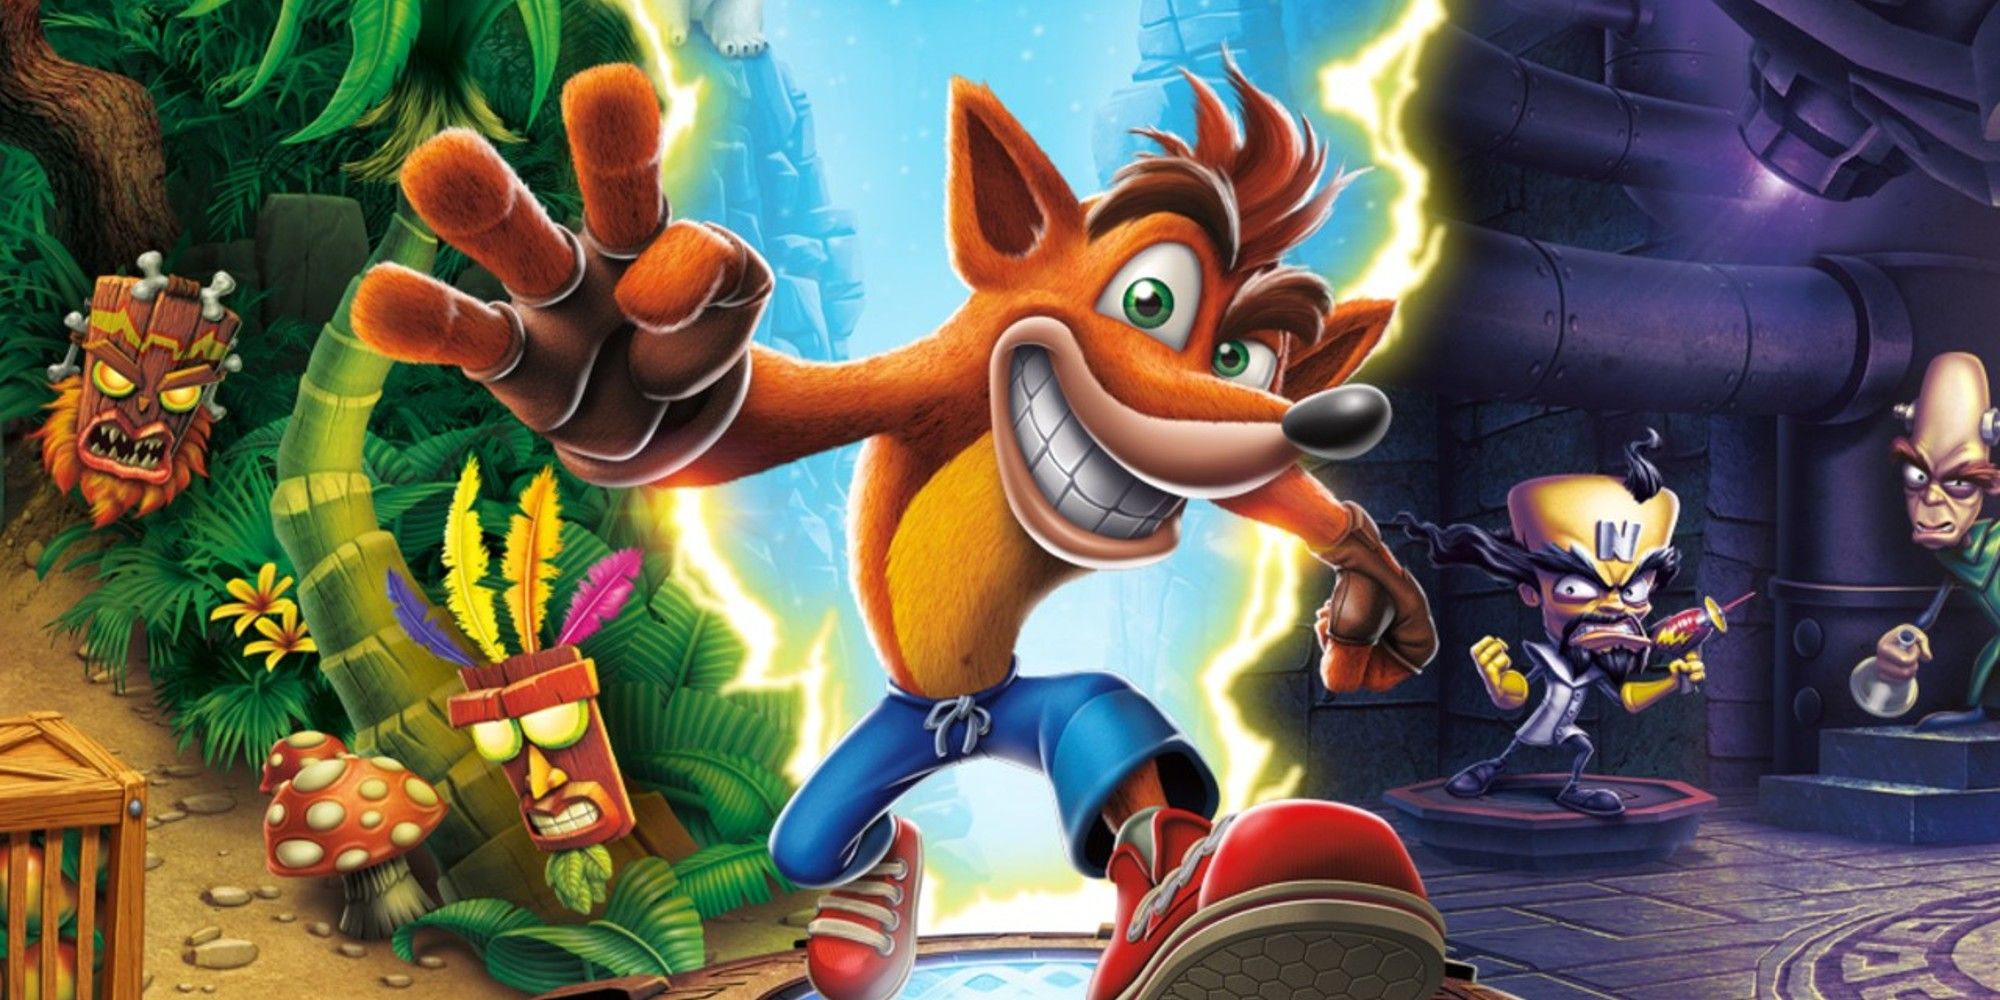 Crash Bandicoot N Sane Trilogy Cover Art with Crash in the middle and realms on his sides